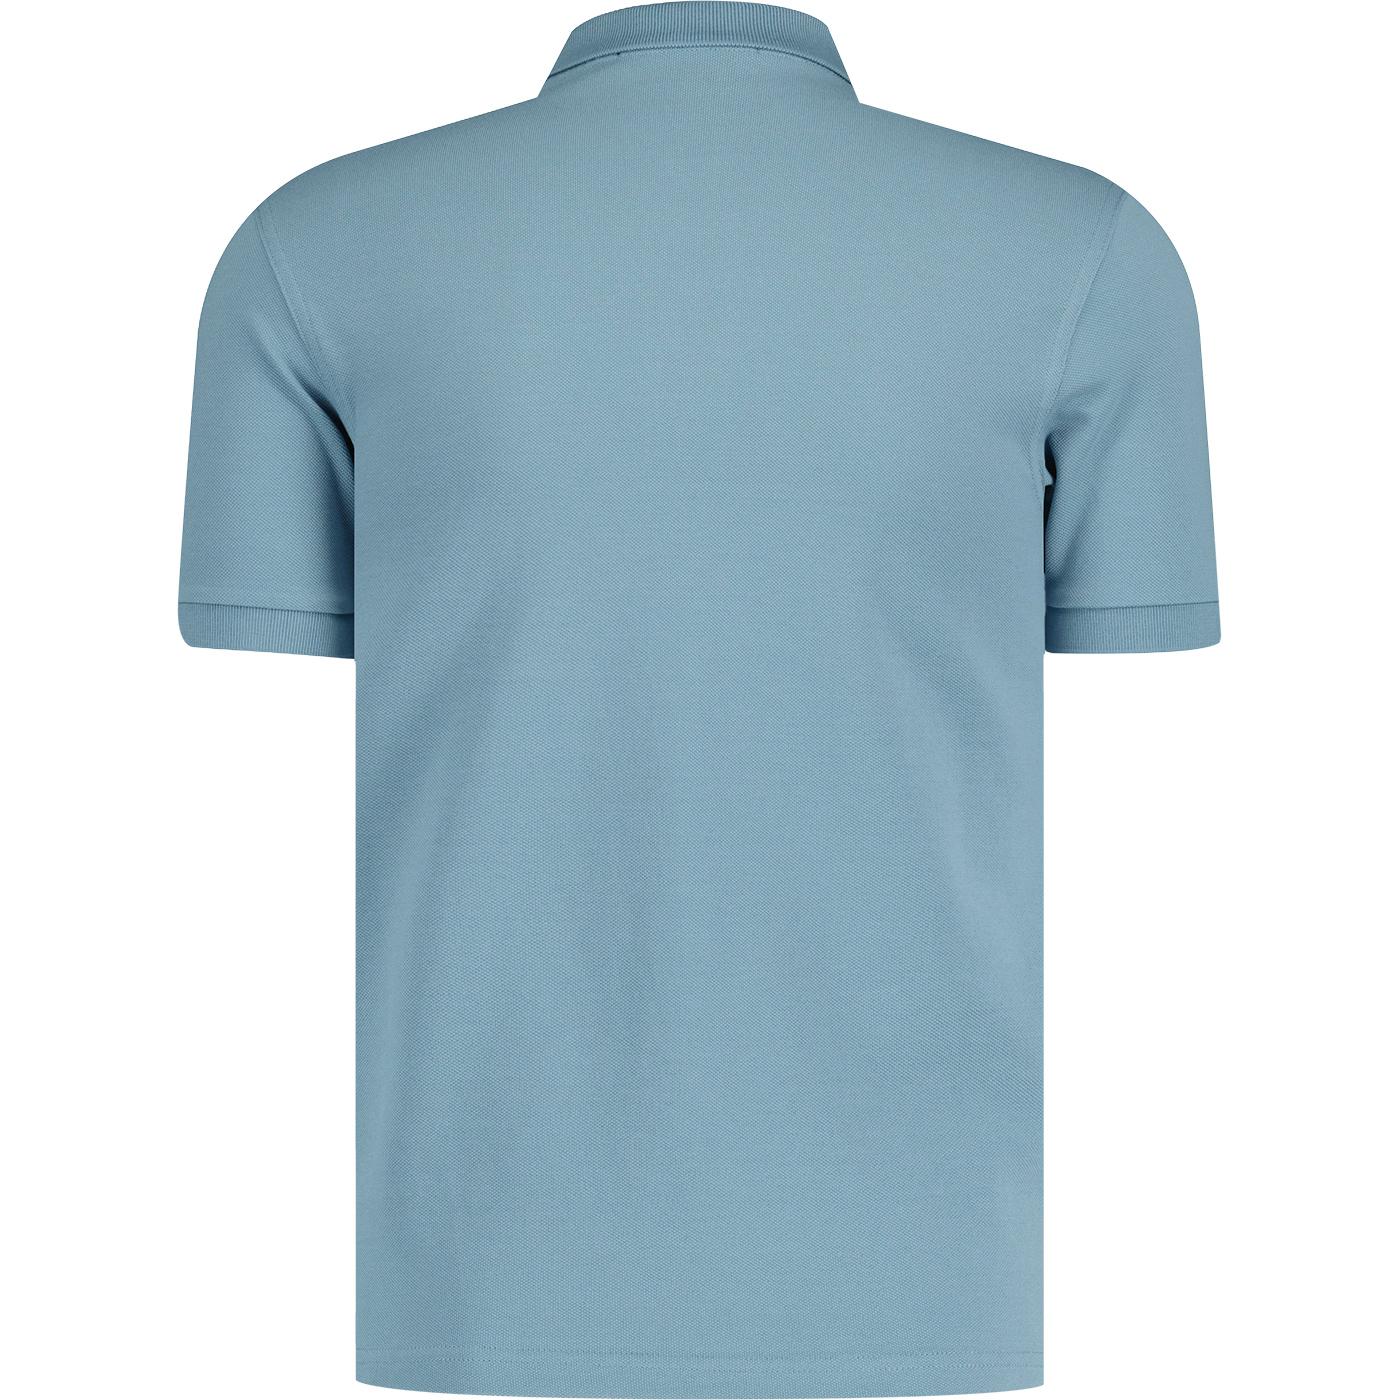 FRED PERRY Men's Retro Slim Fit Pique Polo Shirt in Ash Blue